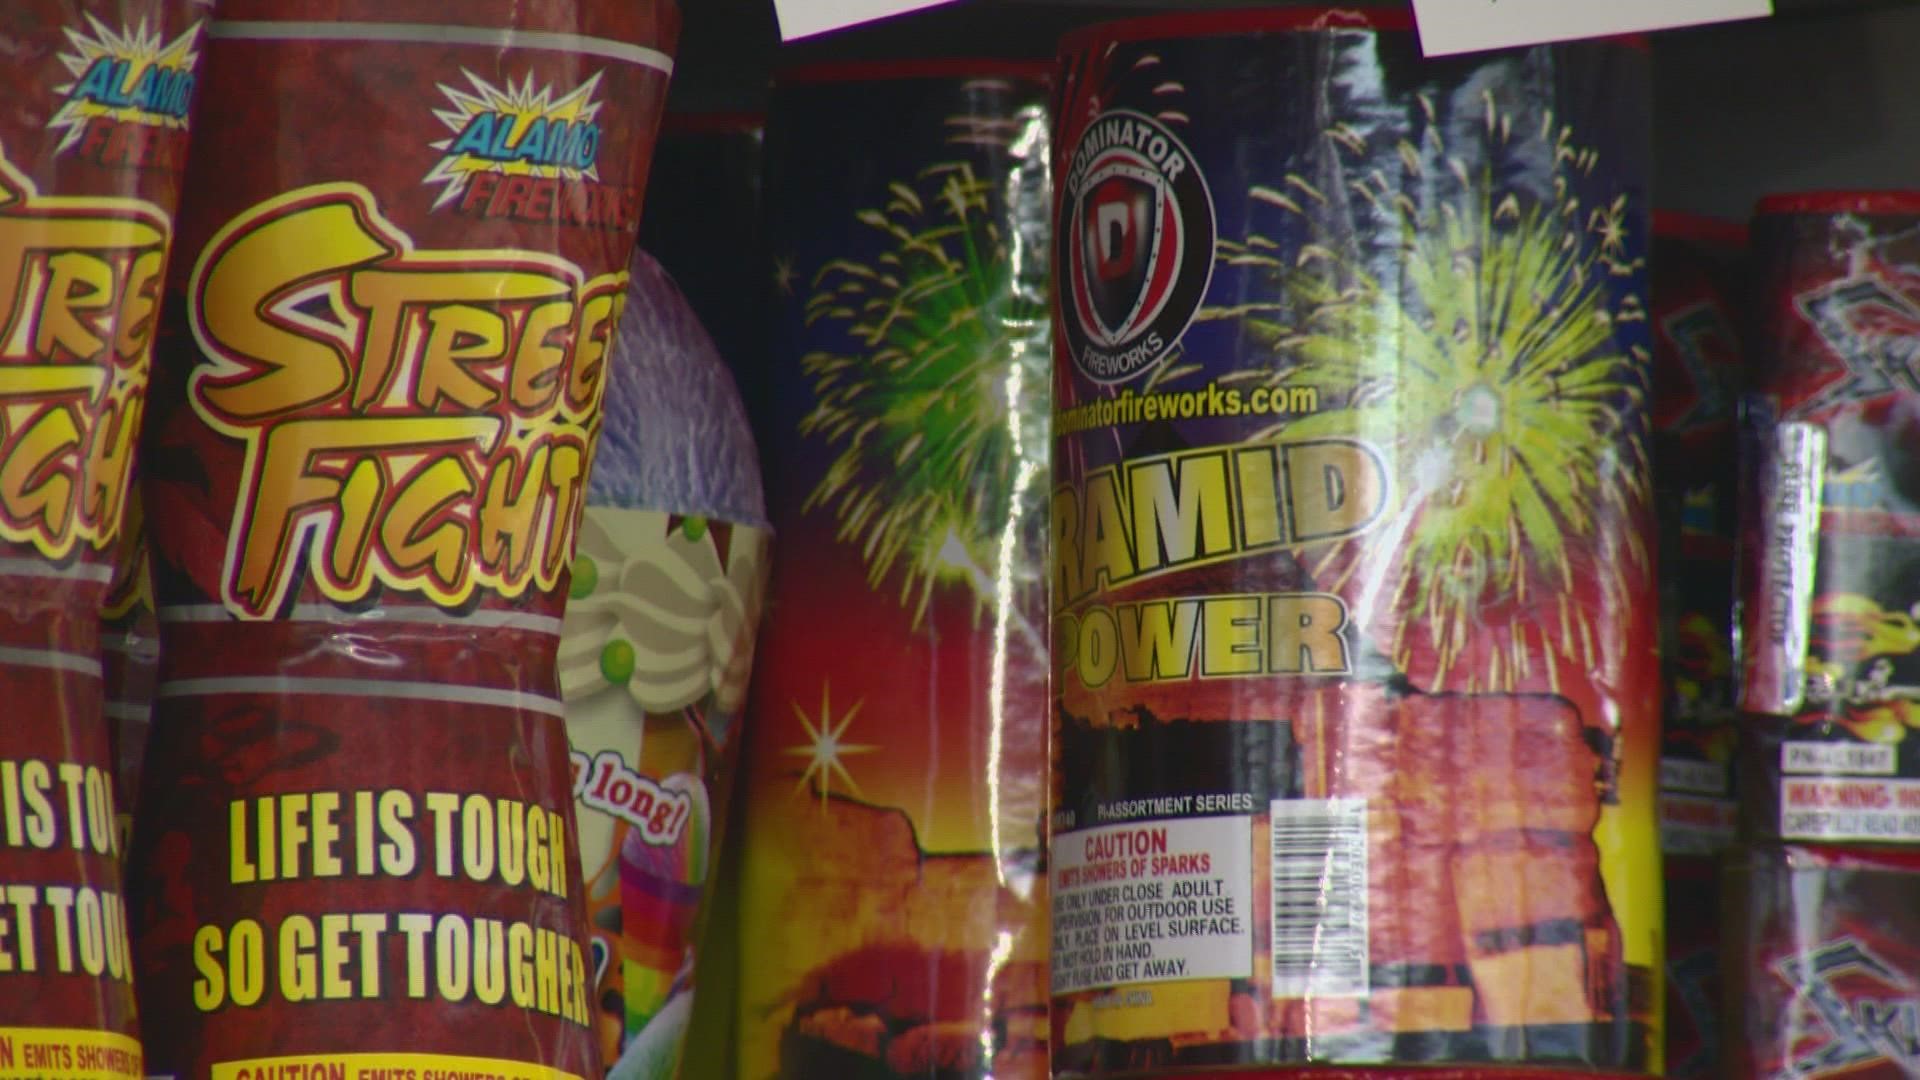 Bexar County Commissioners Court has issued an order that prohibits the sale of certain fireworks this 4thof July.